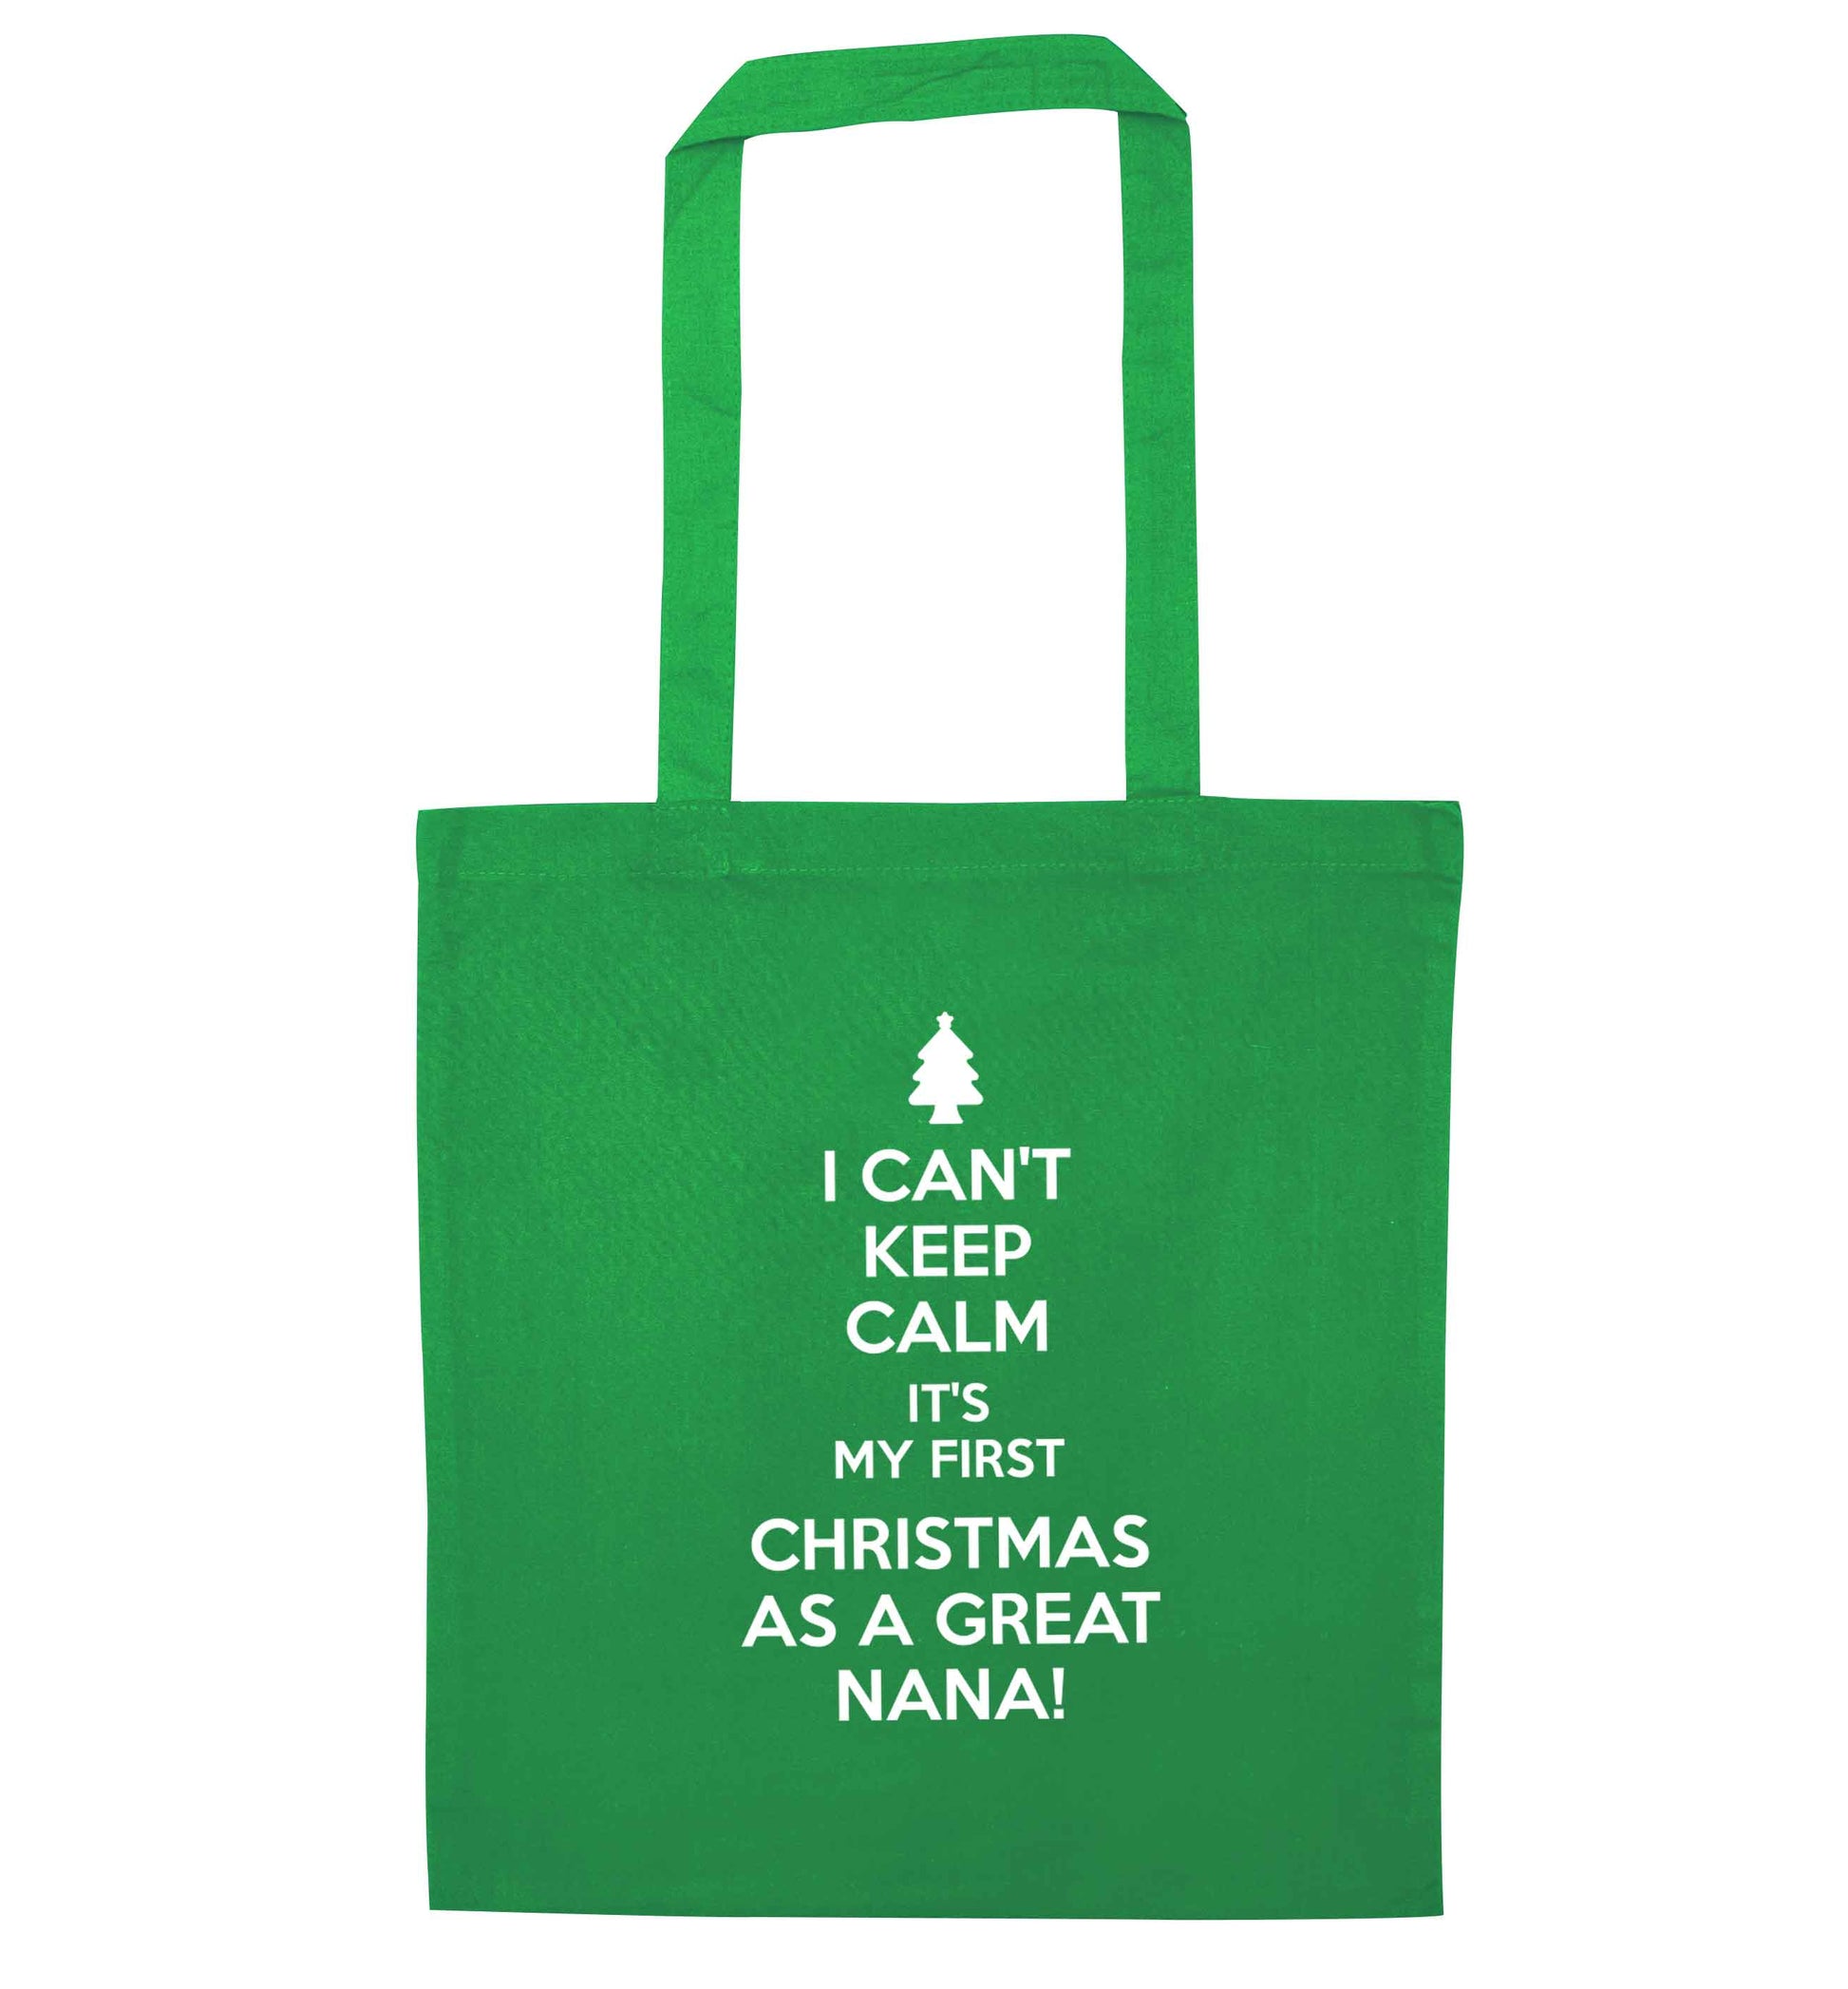 I can't keep calm it's my first Christmas as a great nana! green tote bag